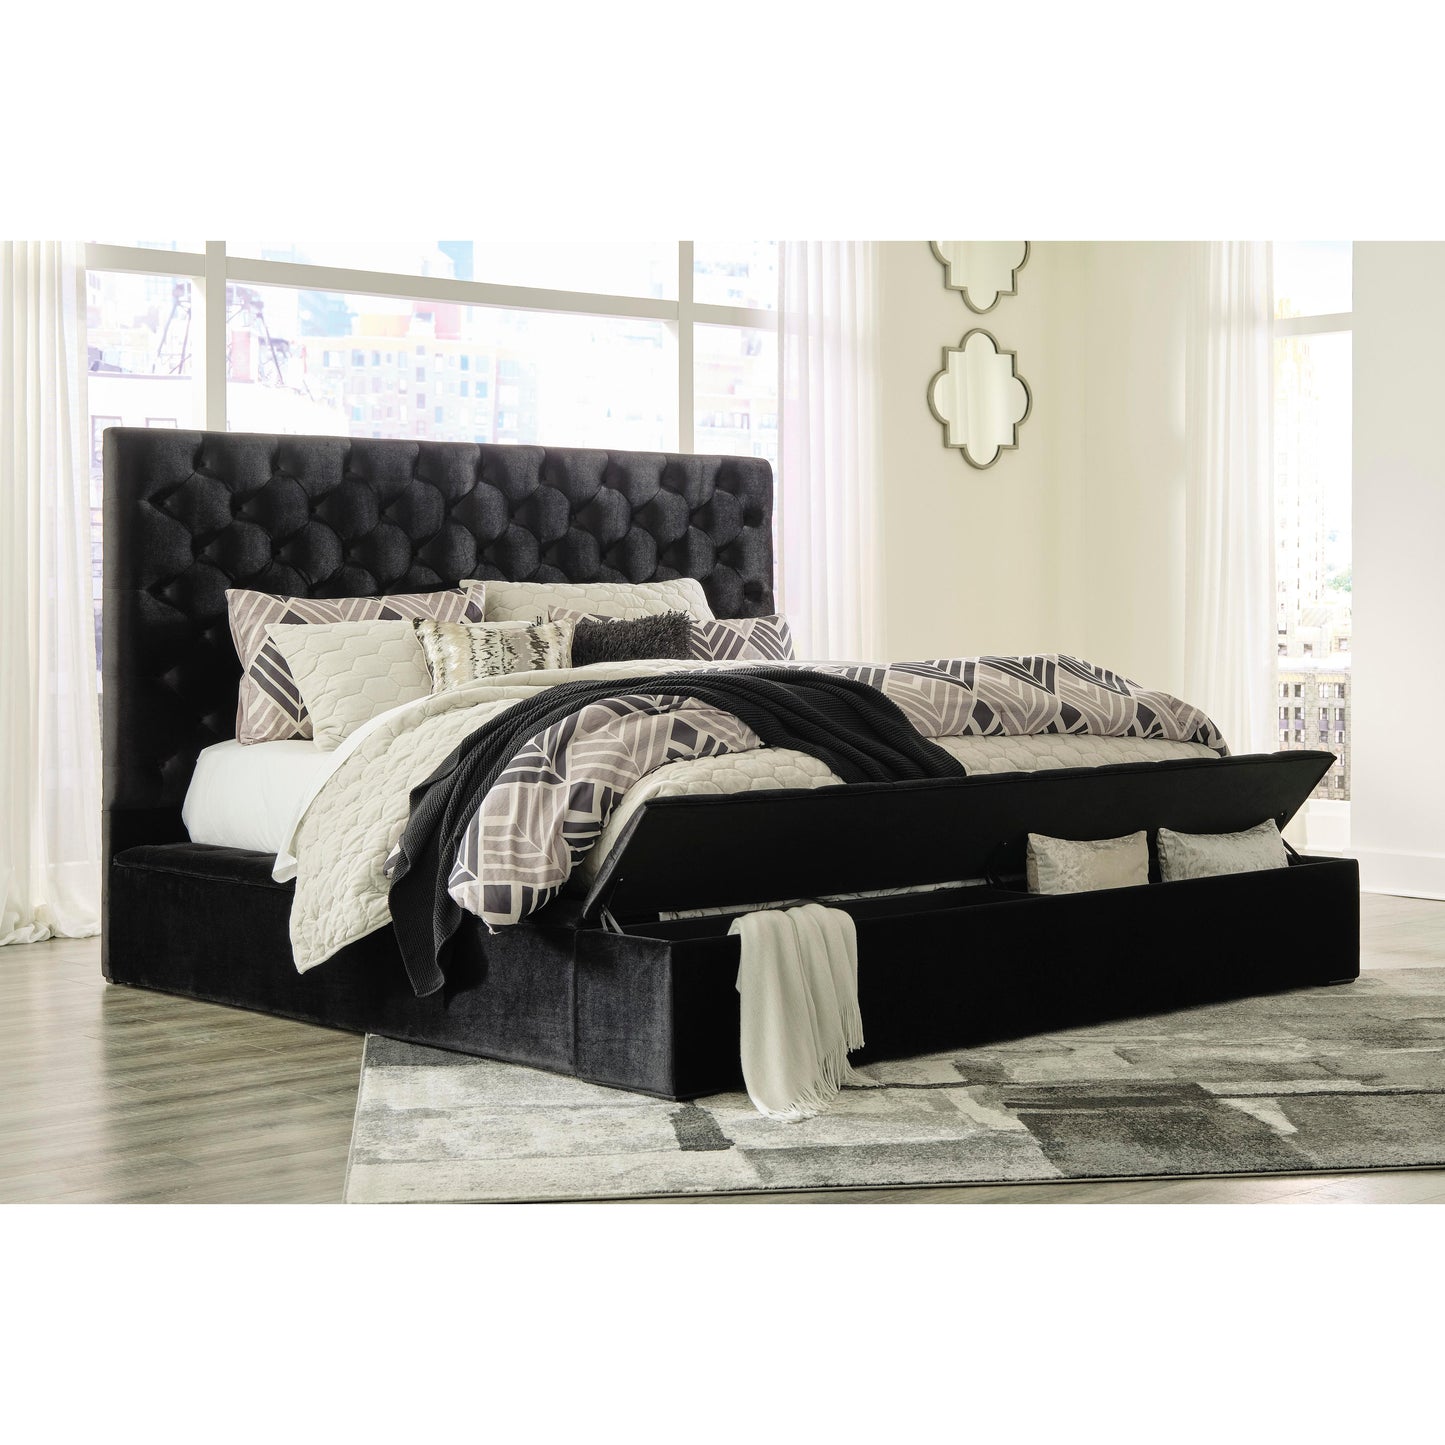 Signature Design by Ashley Lindenfield California King Upholstered Platform Bed with Storage B758-158/B758-156/B758-194 IMAGE 8